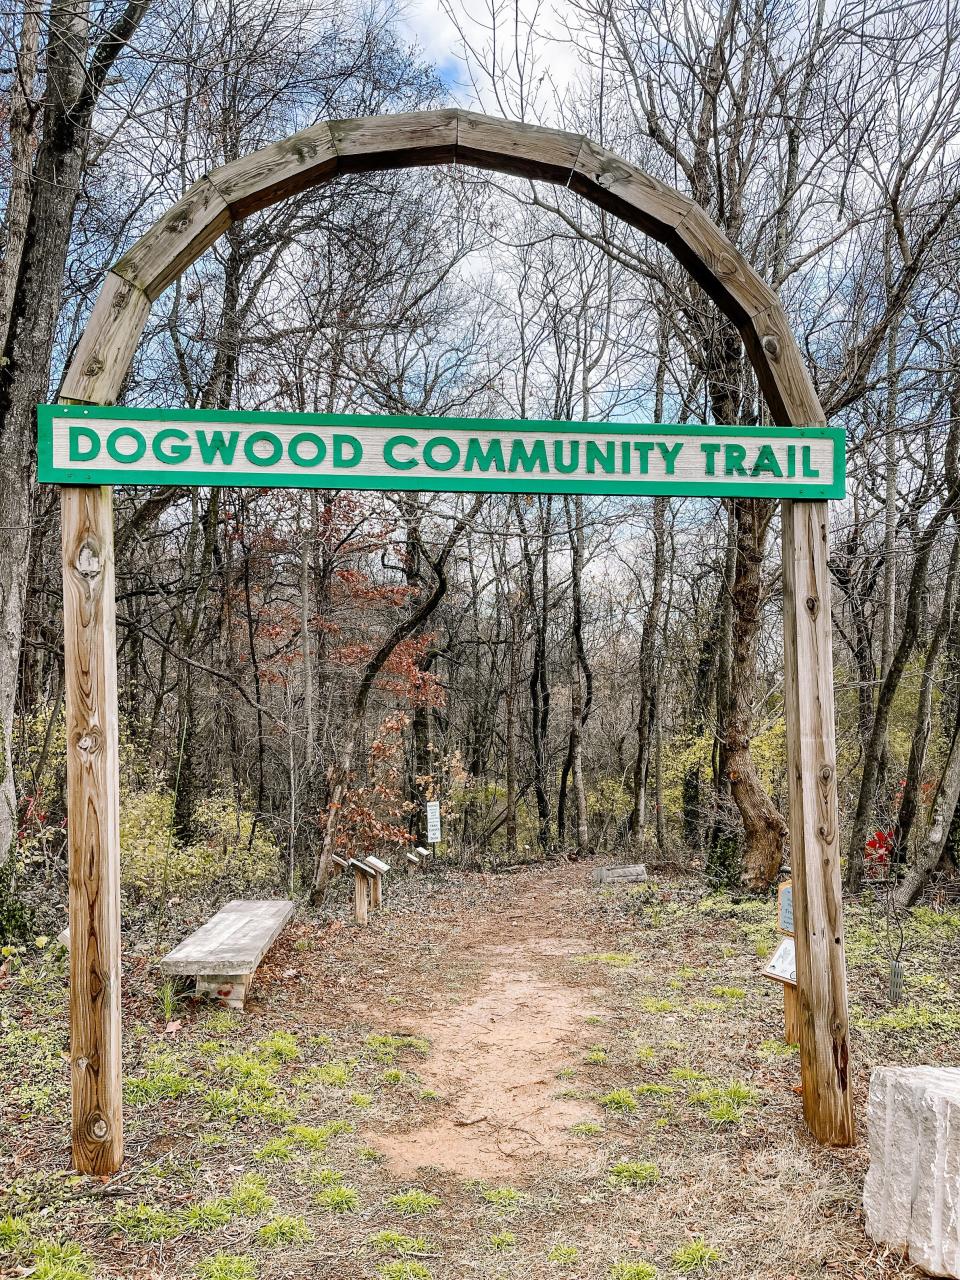 The Dogwood Community Trail has been developed and enhanced over the past seven years as a Community Schools-led effort to promote outdoor education and healthy lifestyles. The trail connects to Stanley Lippencott Ridge Park to the north and Cecil Webb Recreation Center to the east. Nov. 30, 2022.